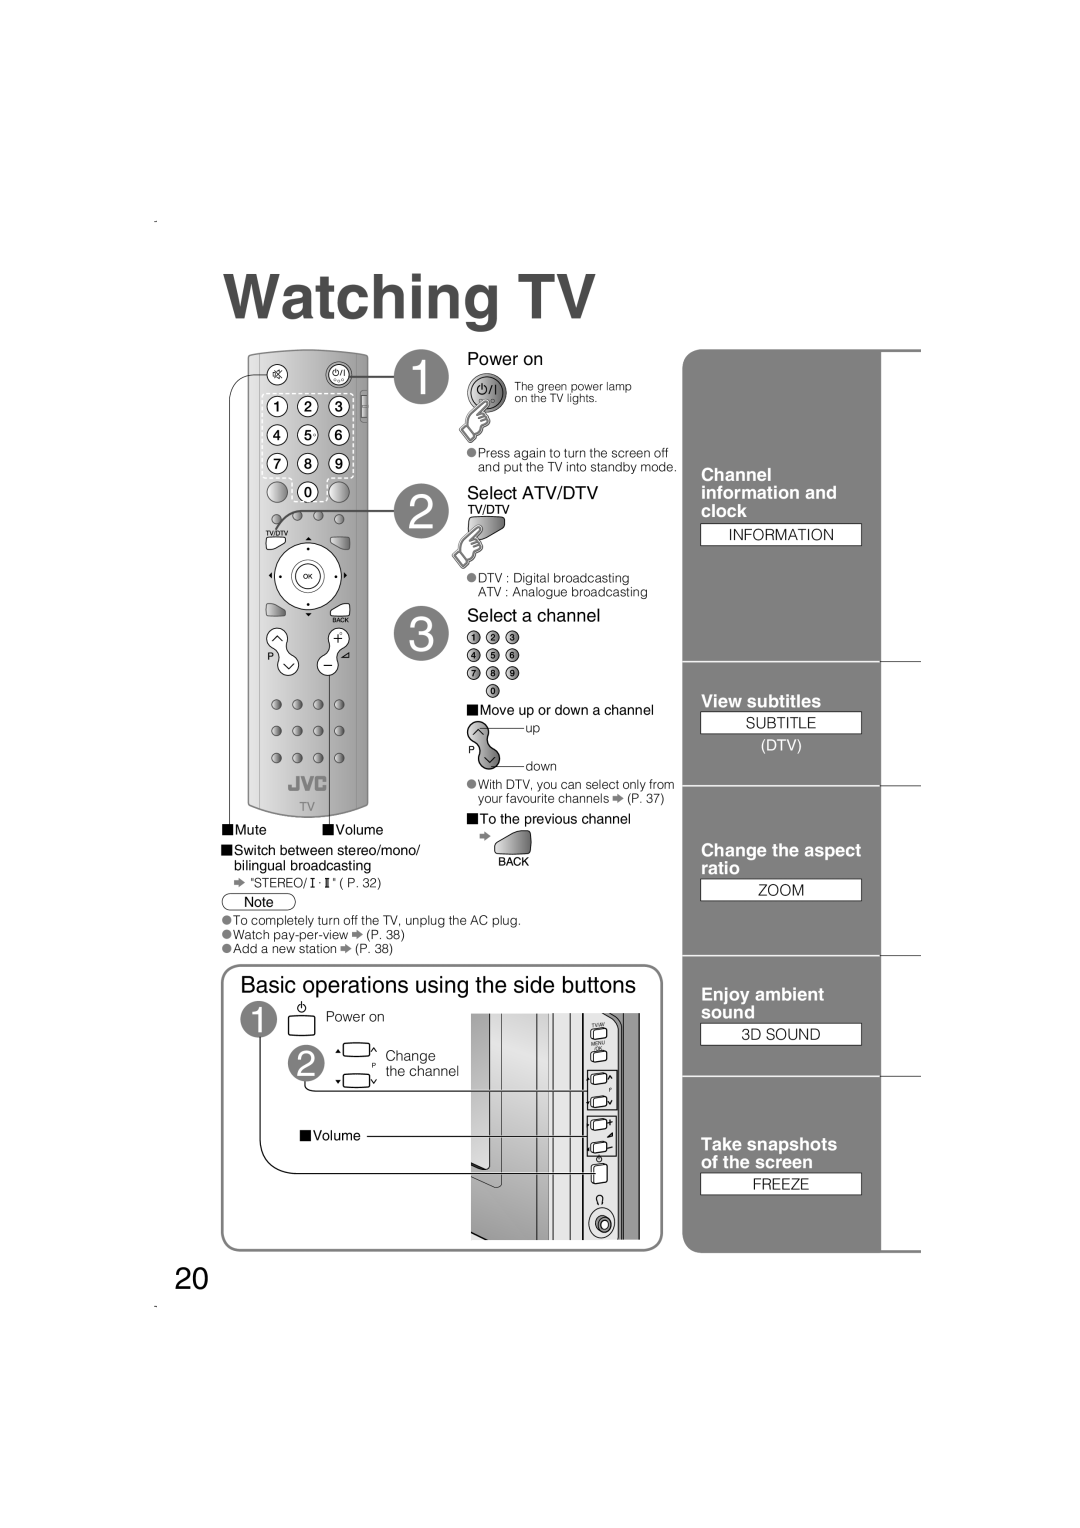 JVC LCT1847-001B-U Watching TV, Basic operations using the side buttons, Channel information and clock, View subtitles 